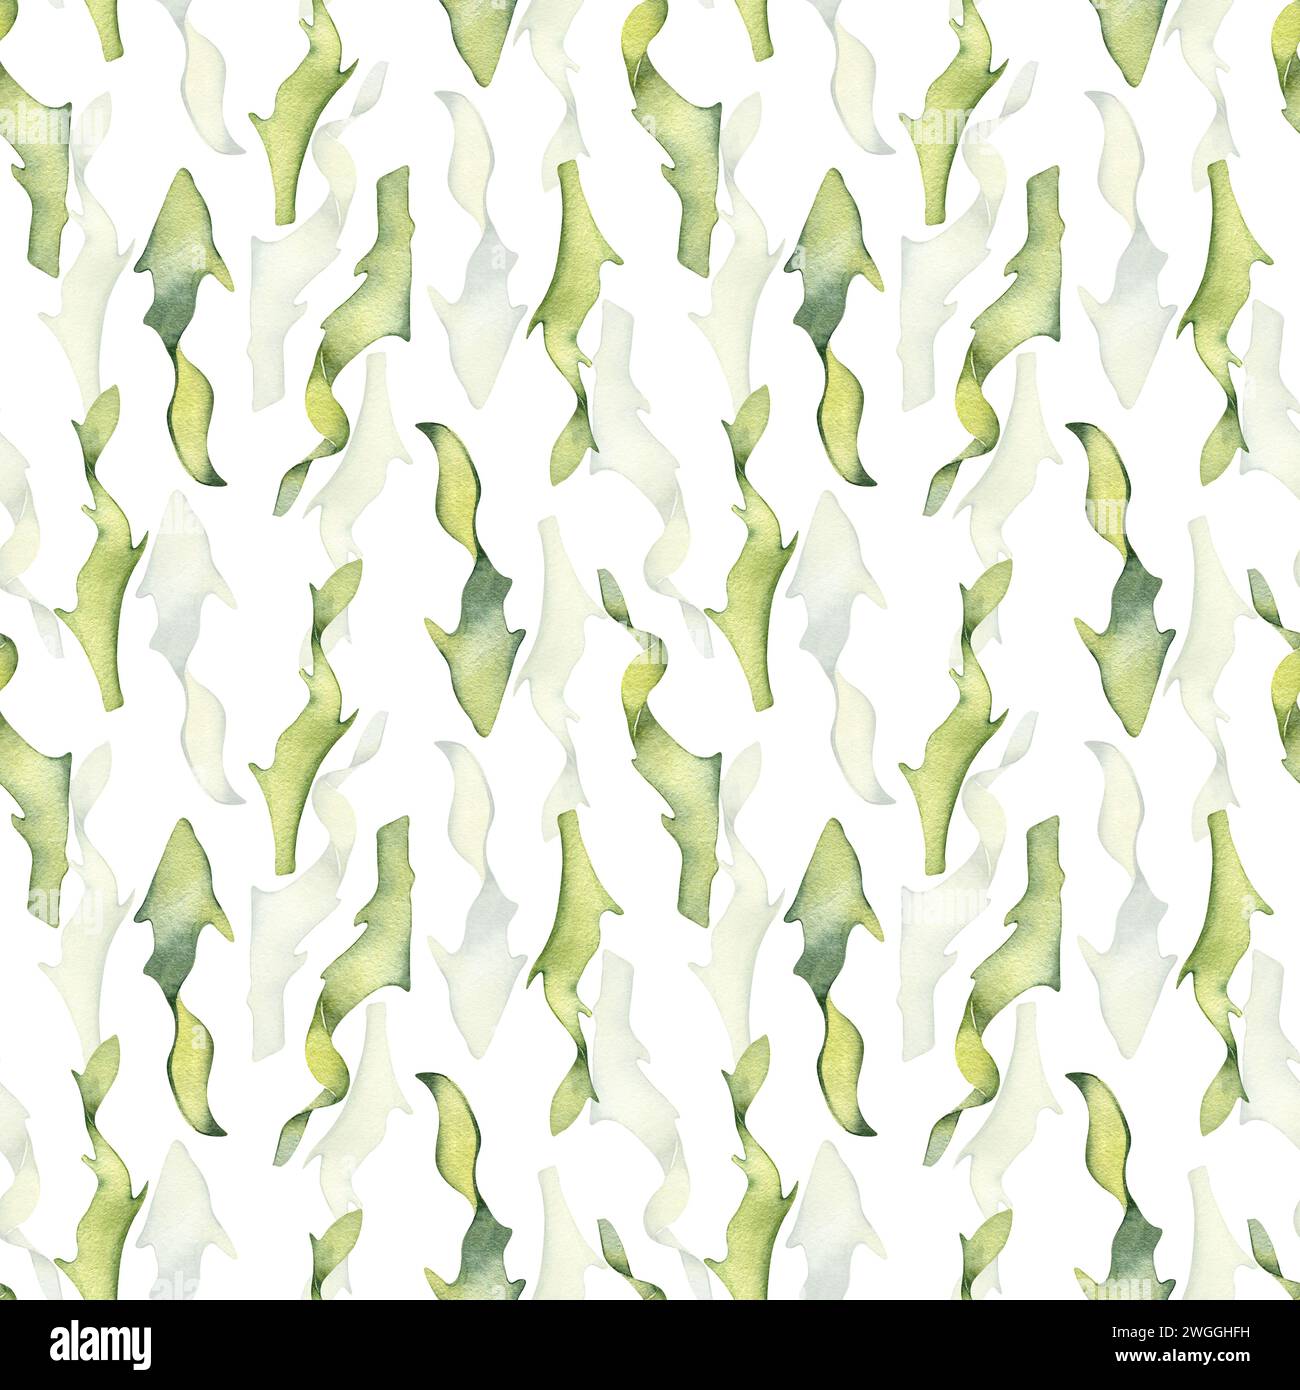 Watercolor seamless pattern of colorful laminaria illustration isolated on white. Kelp, seaweeds hand drawn. Painted algae. Design for background, tex Stock Photo